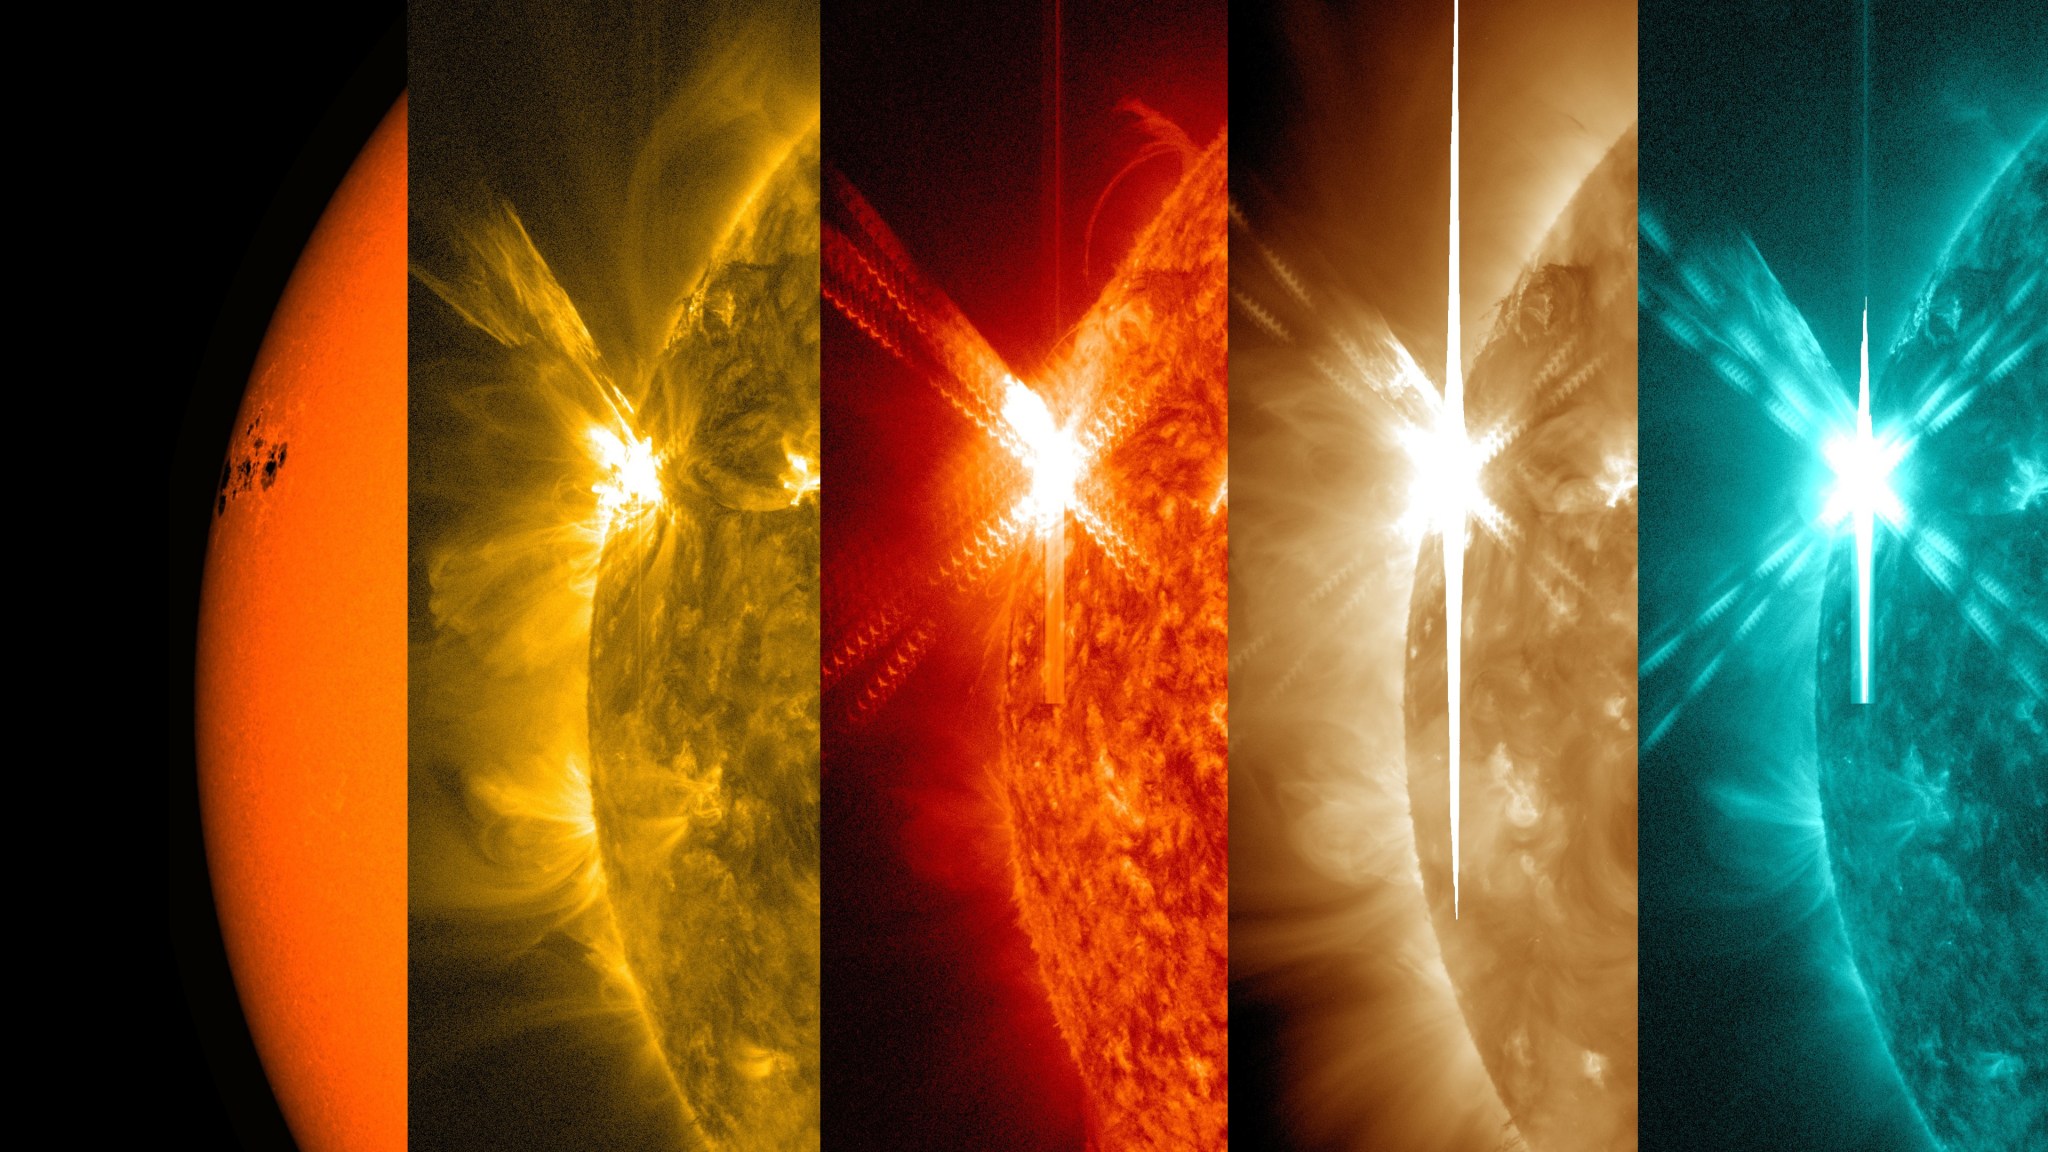 SDO views of 5 May 2015 X-class flare